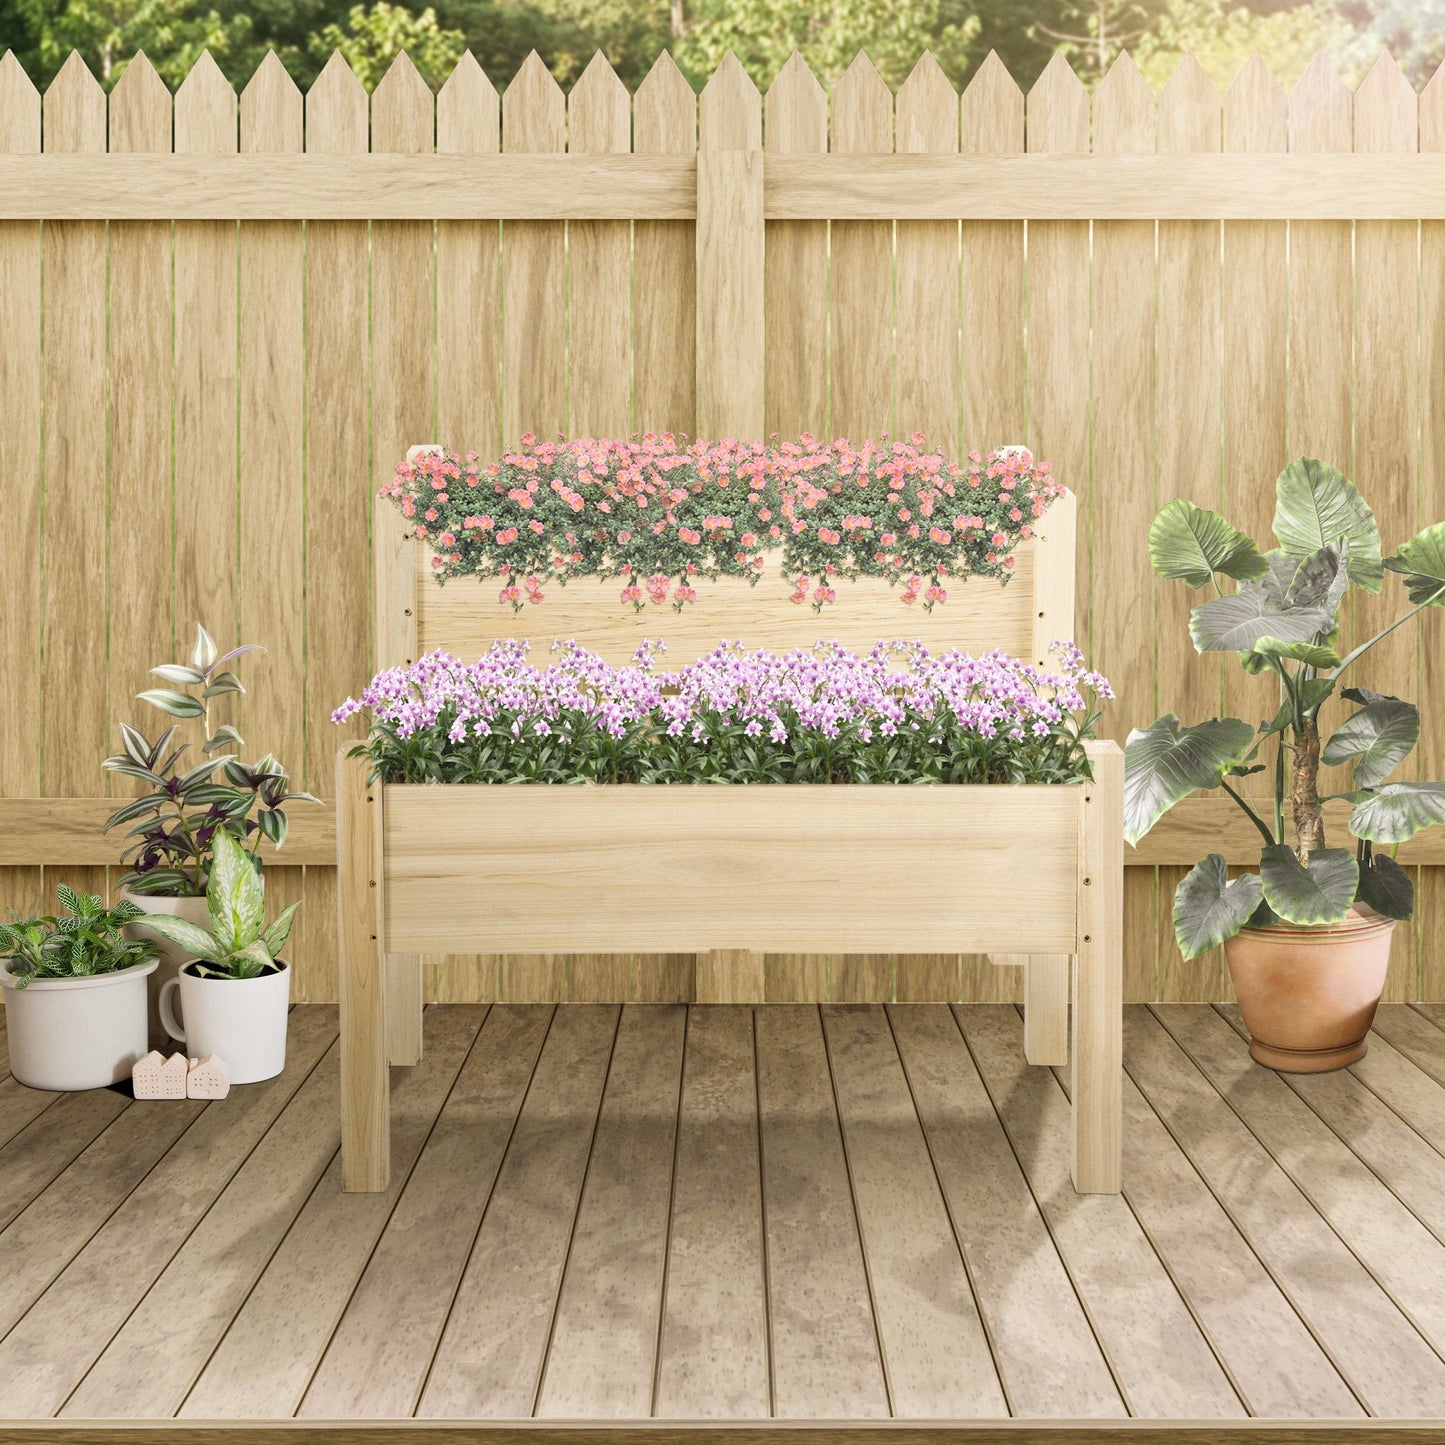 Outdoor and Garden-34"x34"x28" Raised Garden Bed 2-Tier Wooden Planter Box for Backyard, Patio to Grow Vegetables, Herbs, and Flowers - Outdoor Style Company